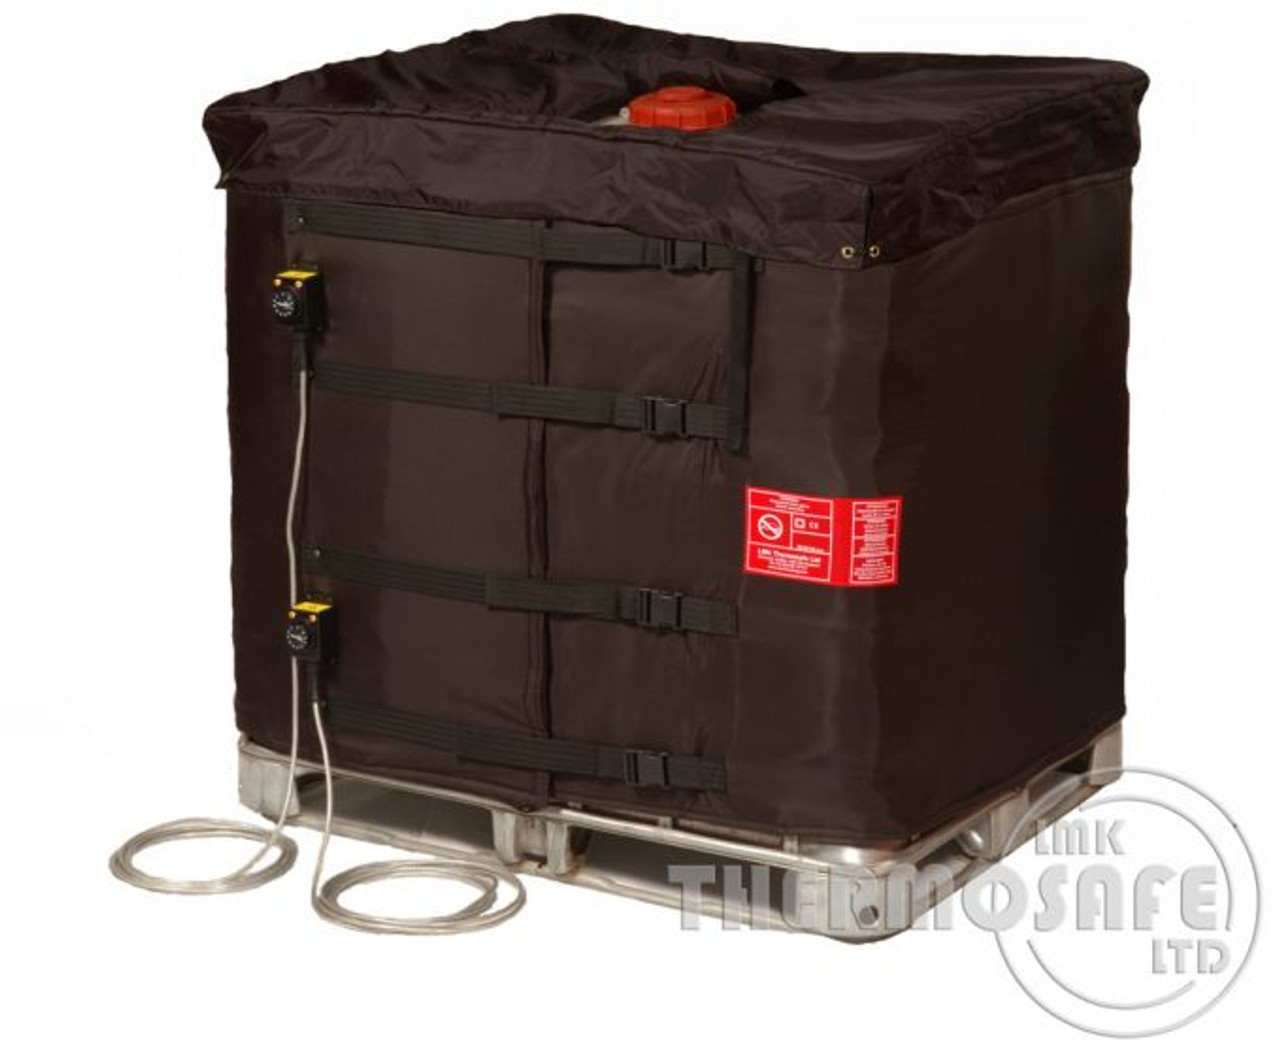 FLEXIBLE HEATING JACKET DUAL ZONE FOR 275 AND 330 GALLON IBC